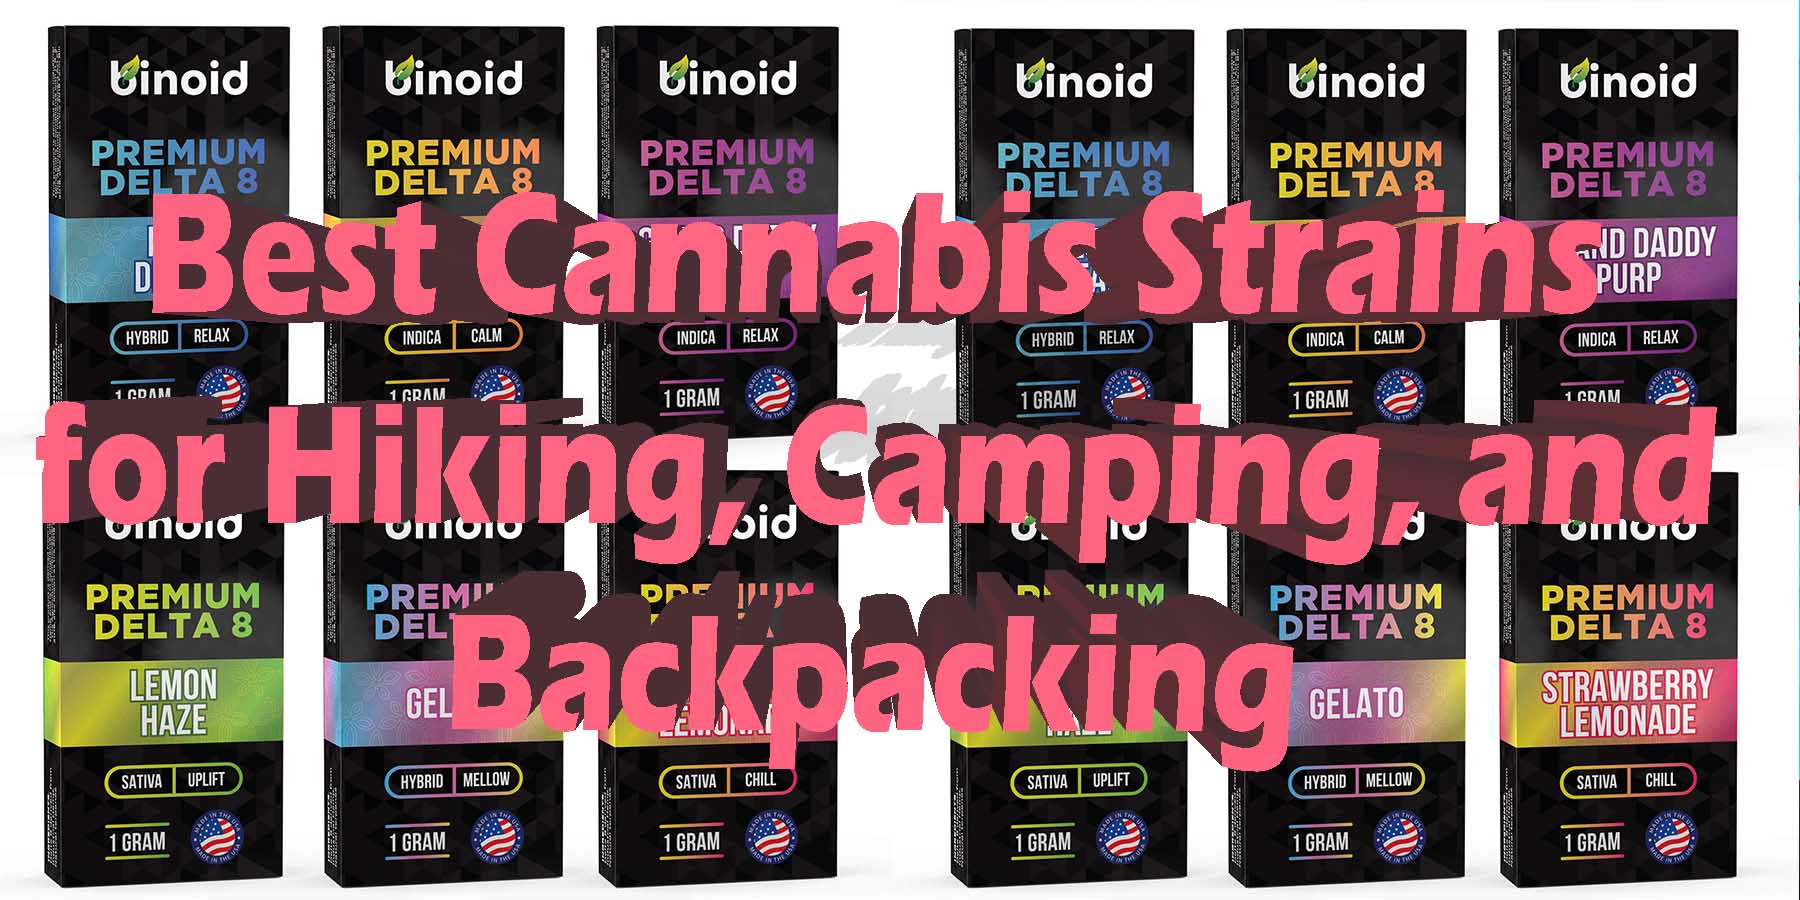 Best-Cannabis-Strains-for-Hiking-Camping-and-Backpacking-WhereToGet-HowToGetNearMe-BestPlace-LowestPrice-Coupon-Discount-For-Smoking-Best-High-Smoke-Shop-Online-Near me Binoid